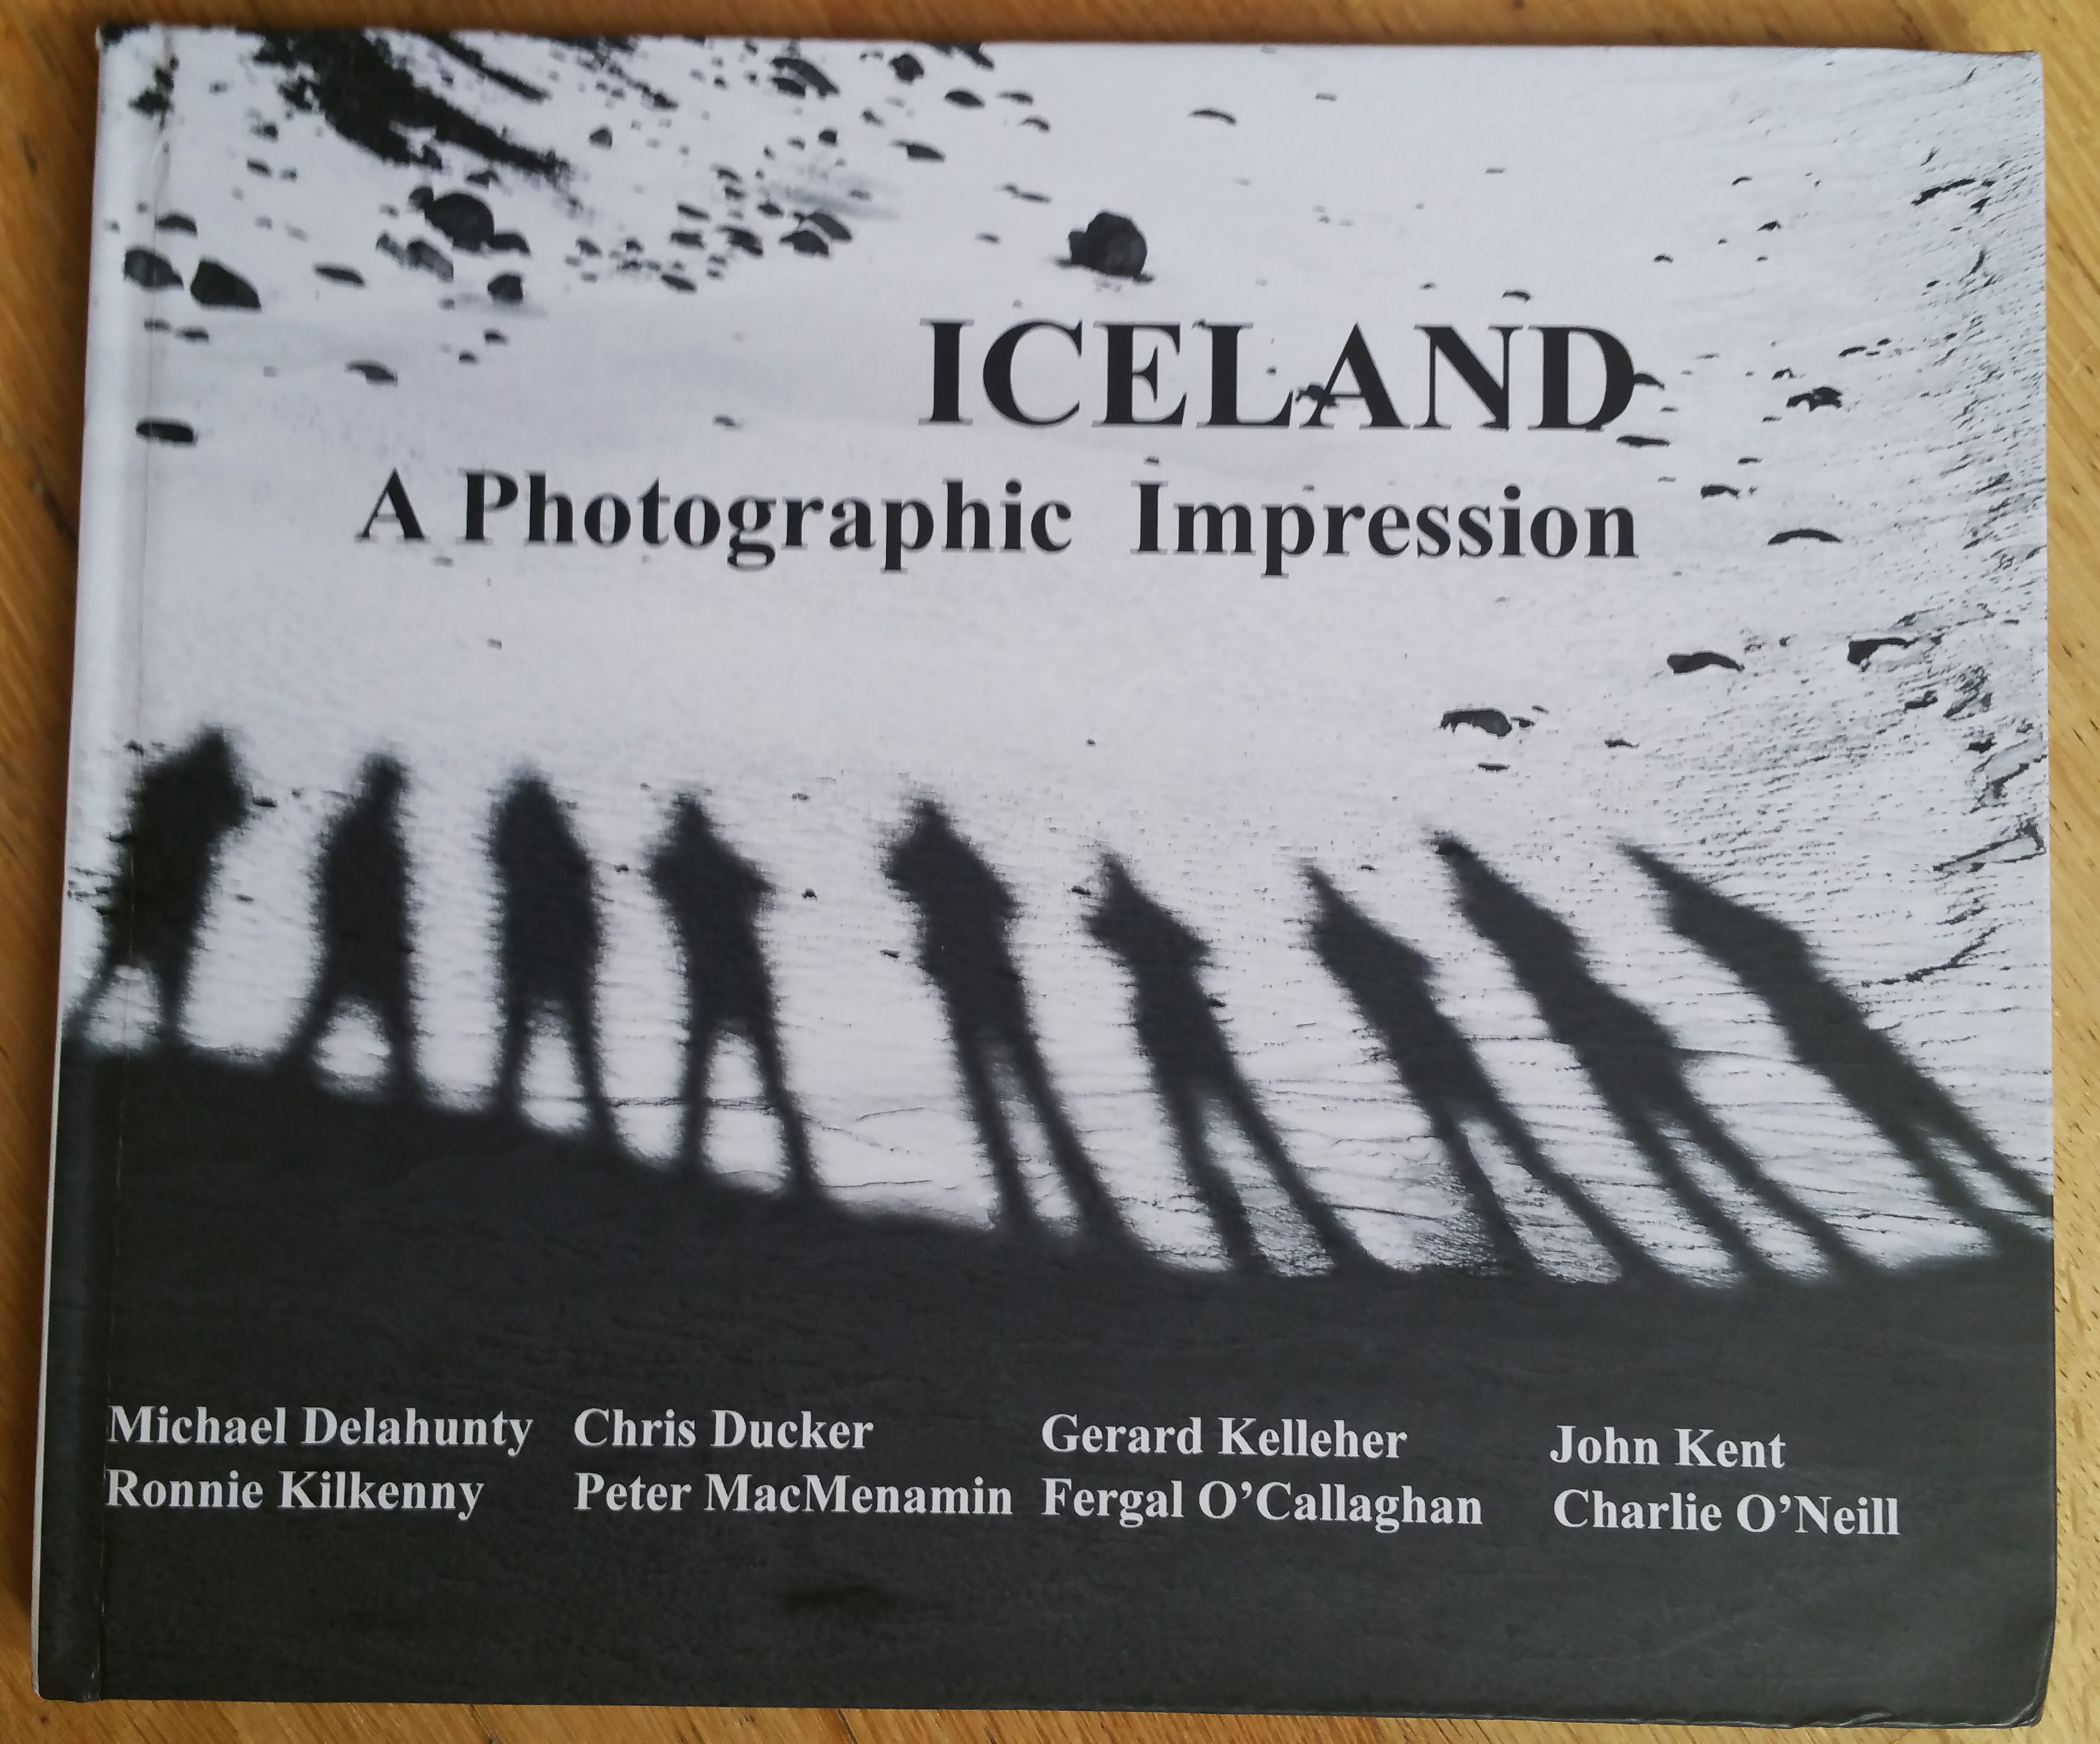 ICELAND – A Photographic Impression